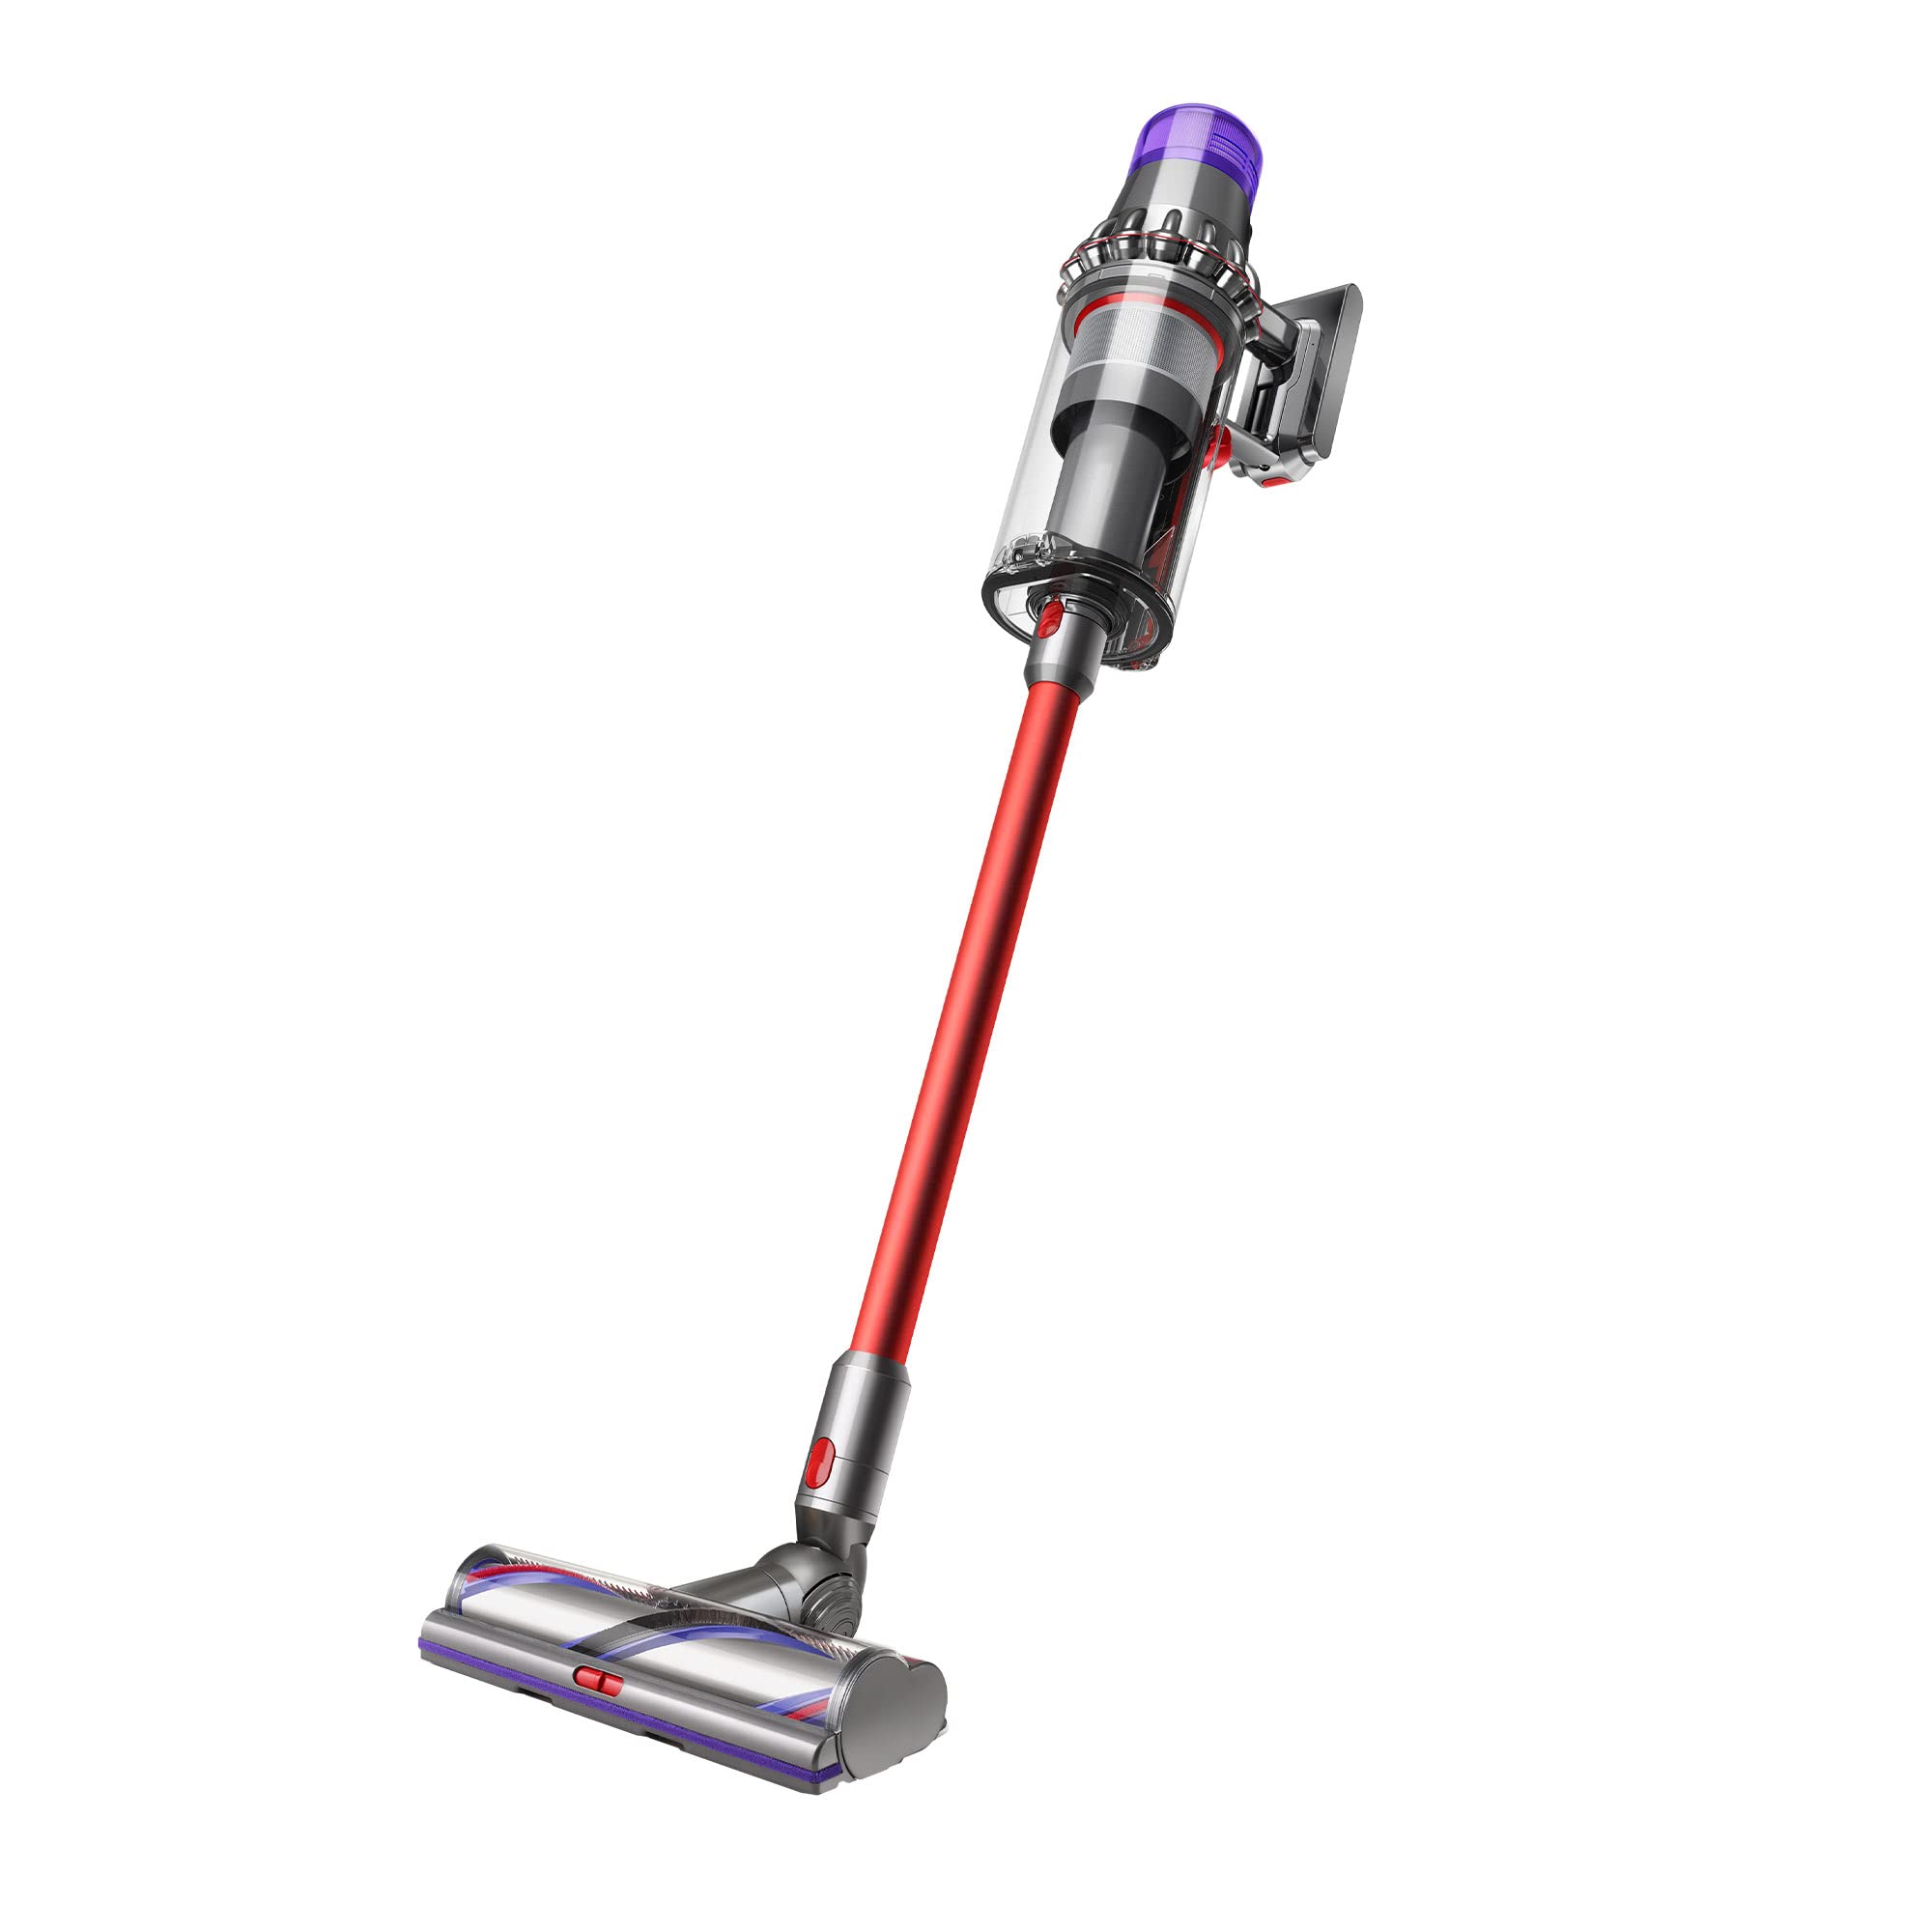 Dyson Outsize Cordless Vacuum Cleaner (Nickel/Red) $380 + Free Shipping